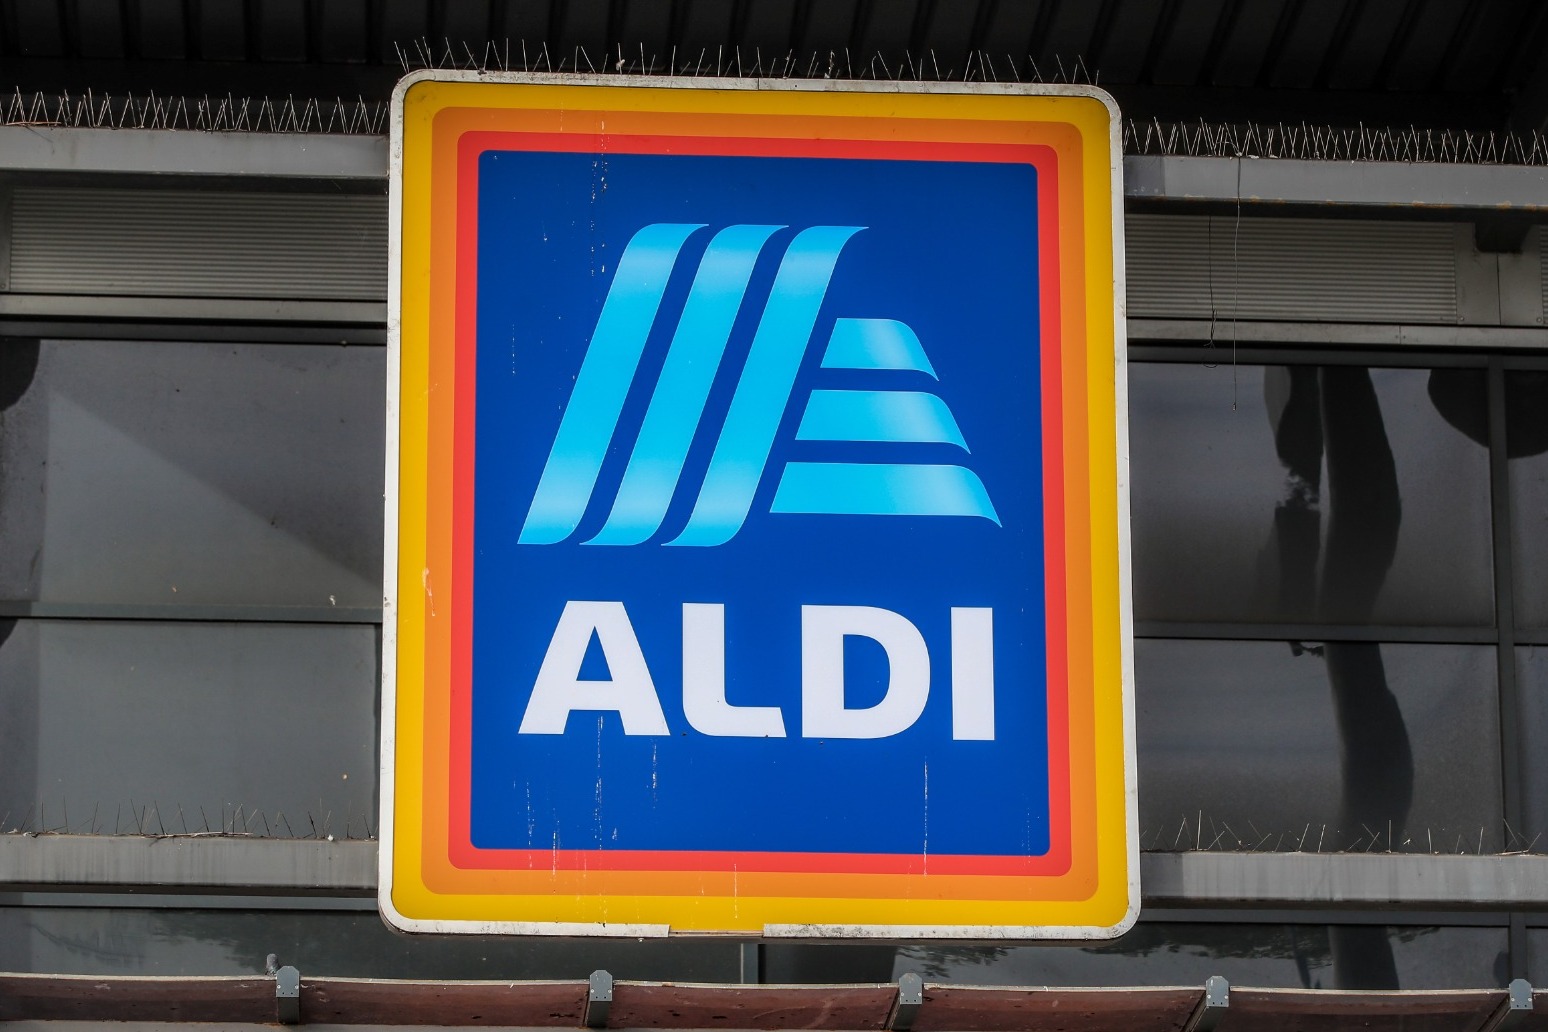 Preserving lower prices more important than short term profit says Aldi boss